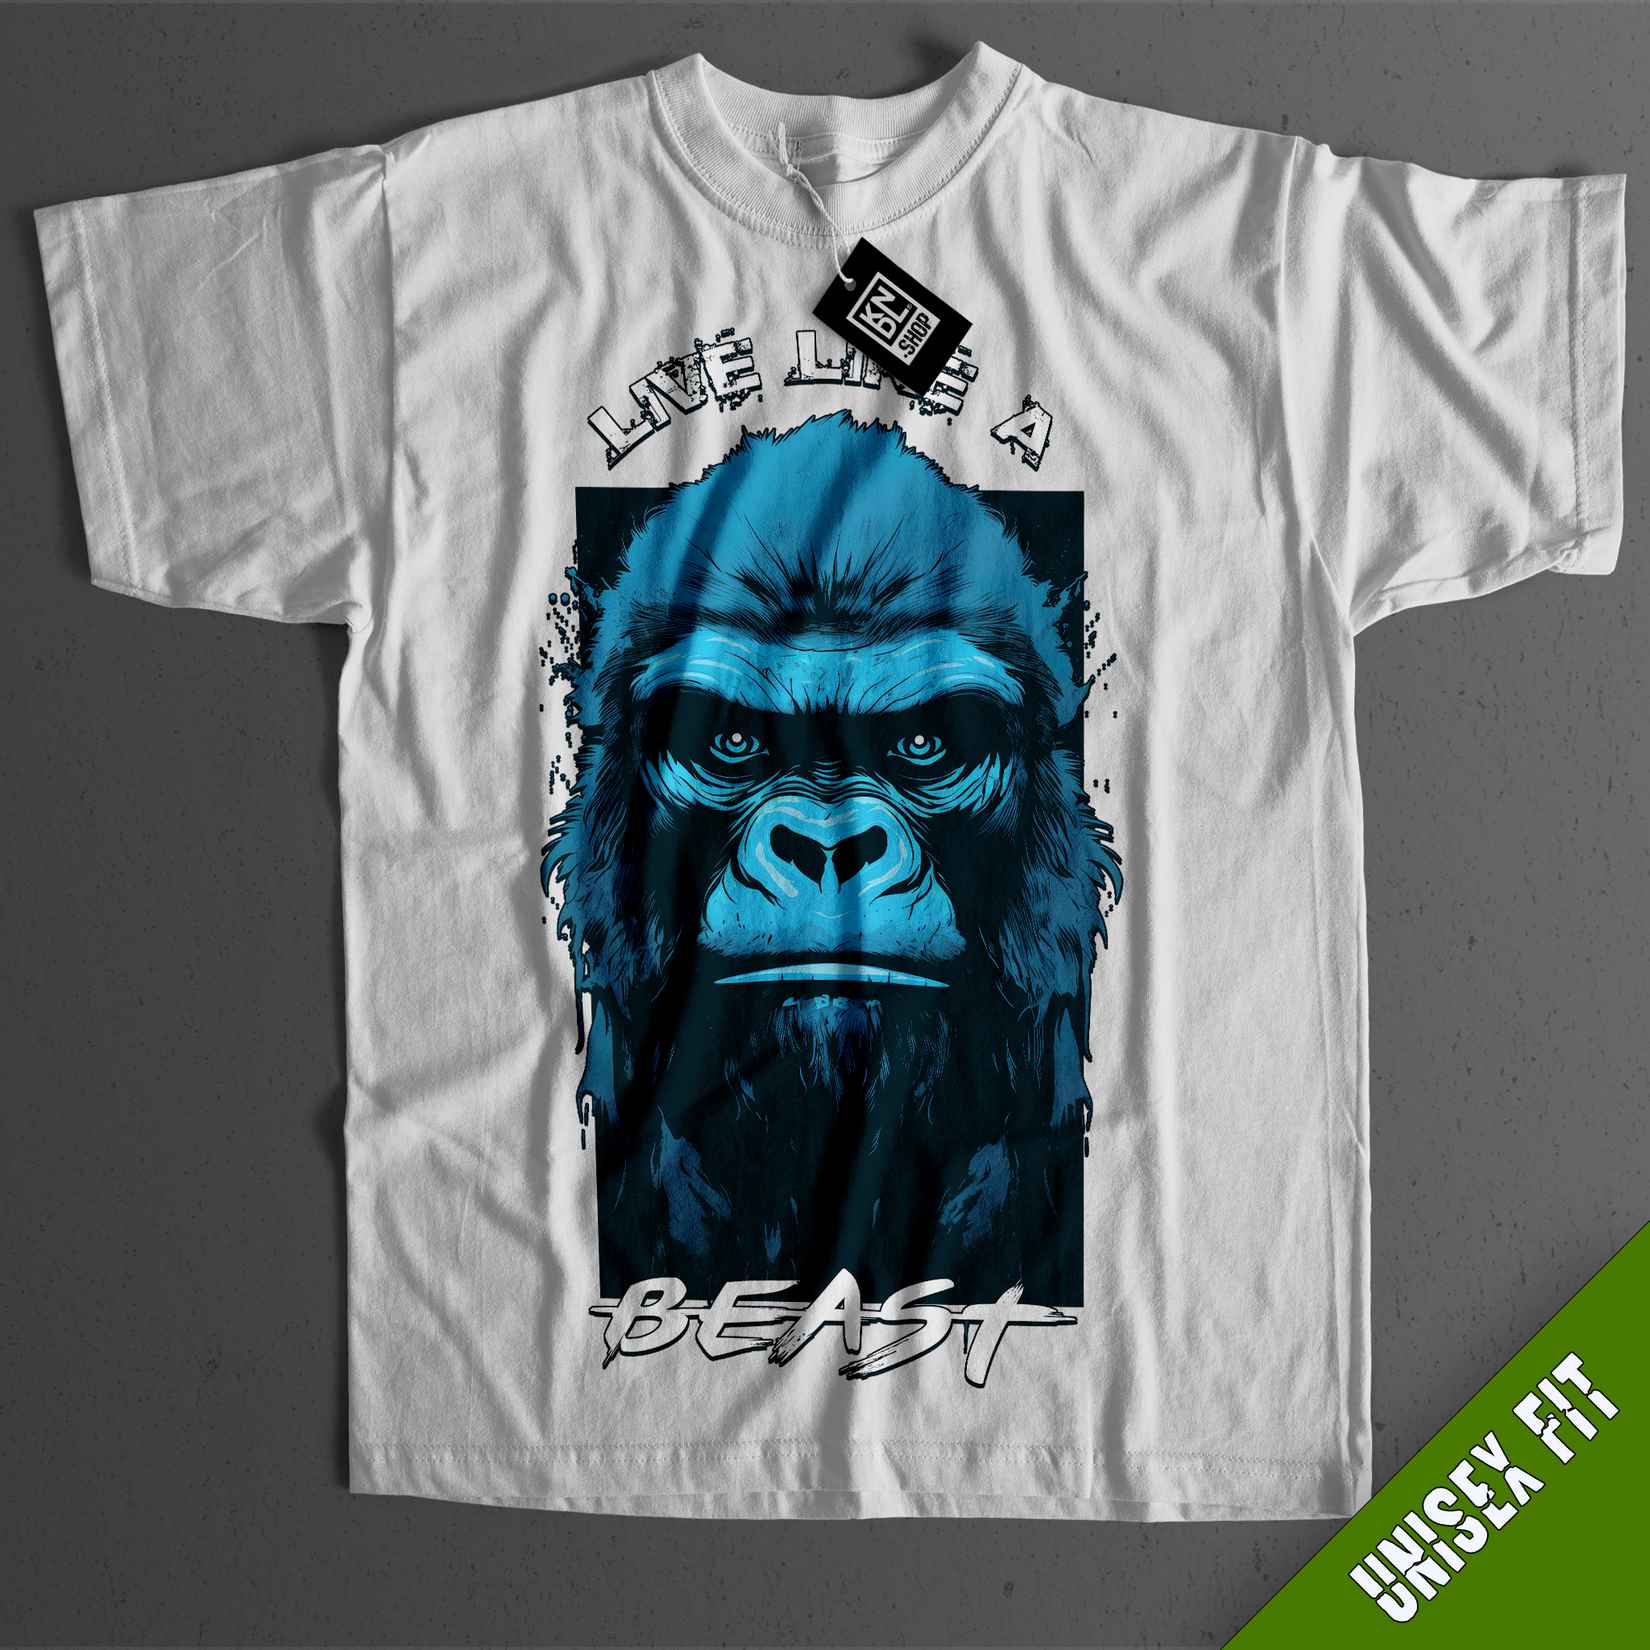 a white t - shirt with a gorilla face on it